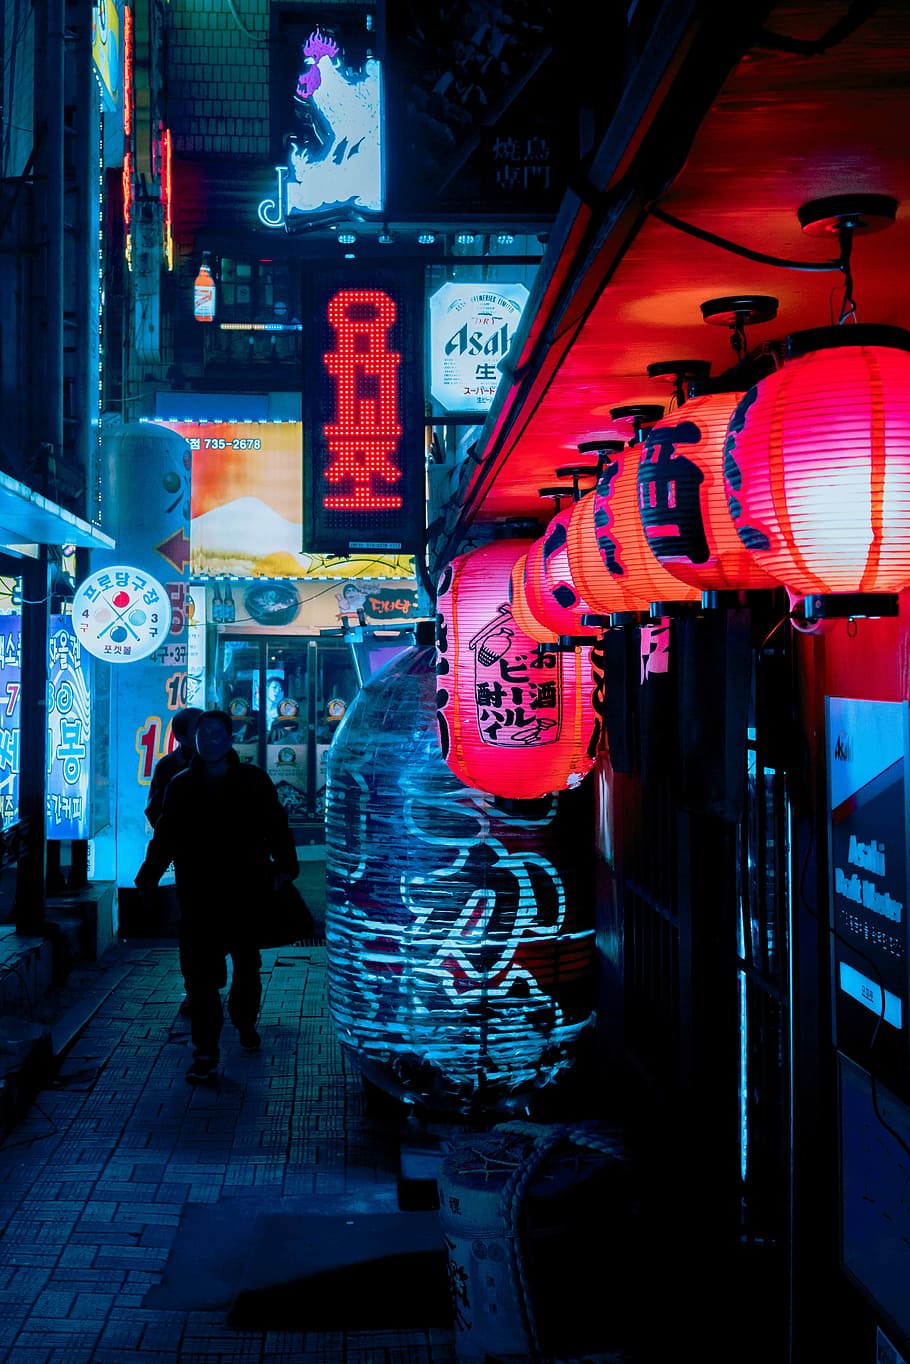 Seoul, silhouette of person walking in hallway street with neon signs